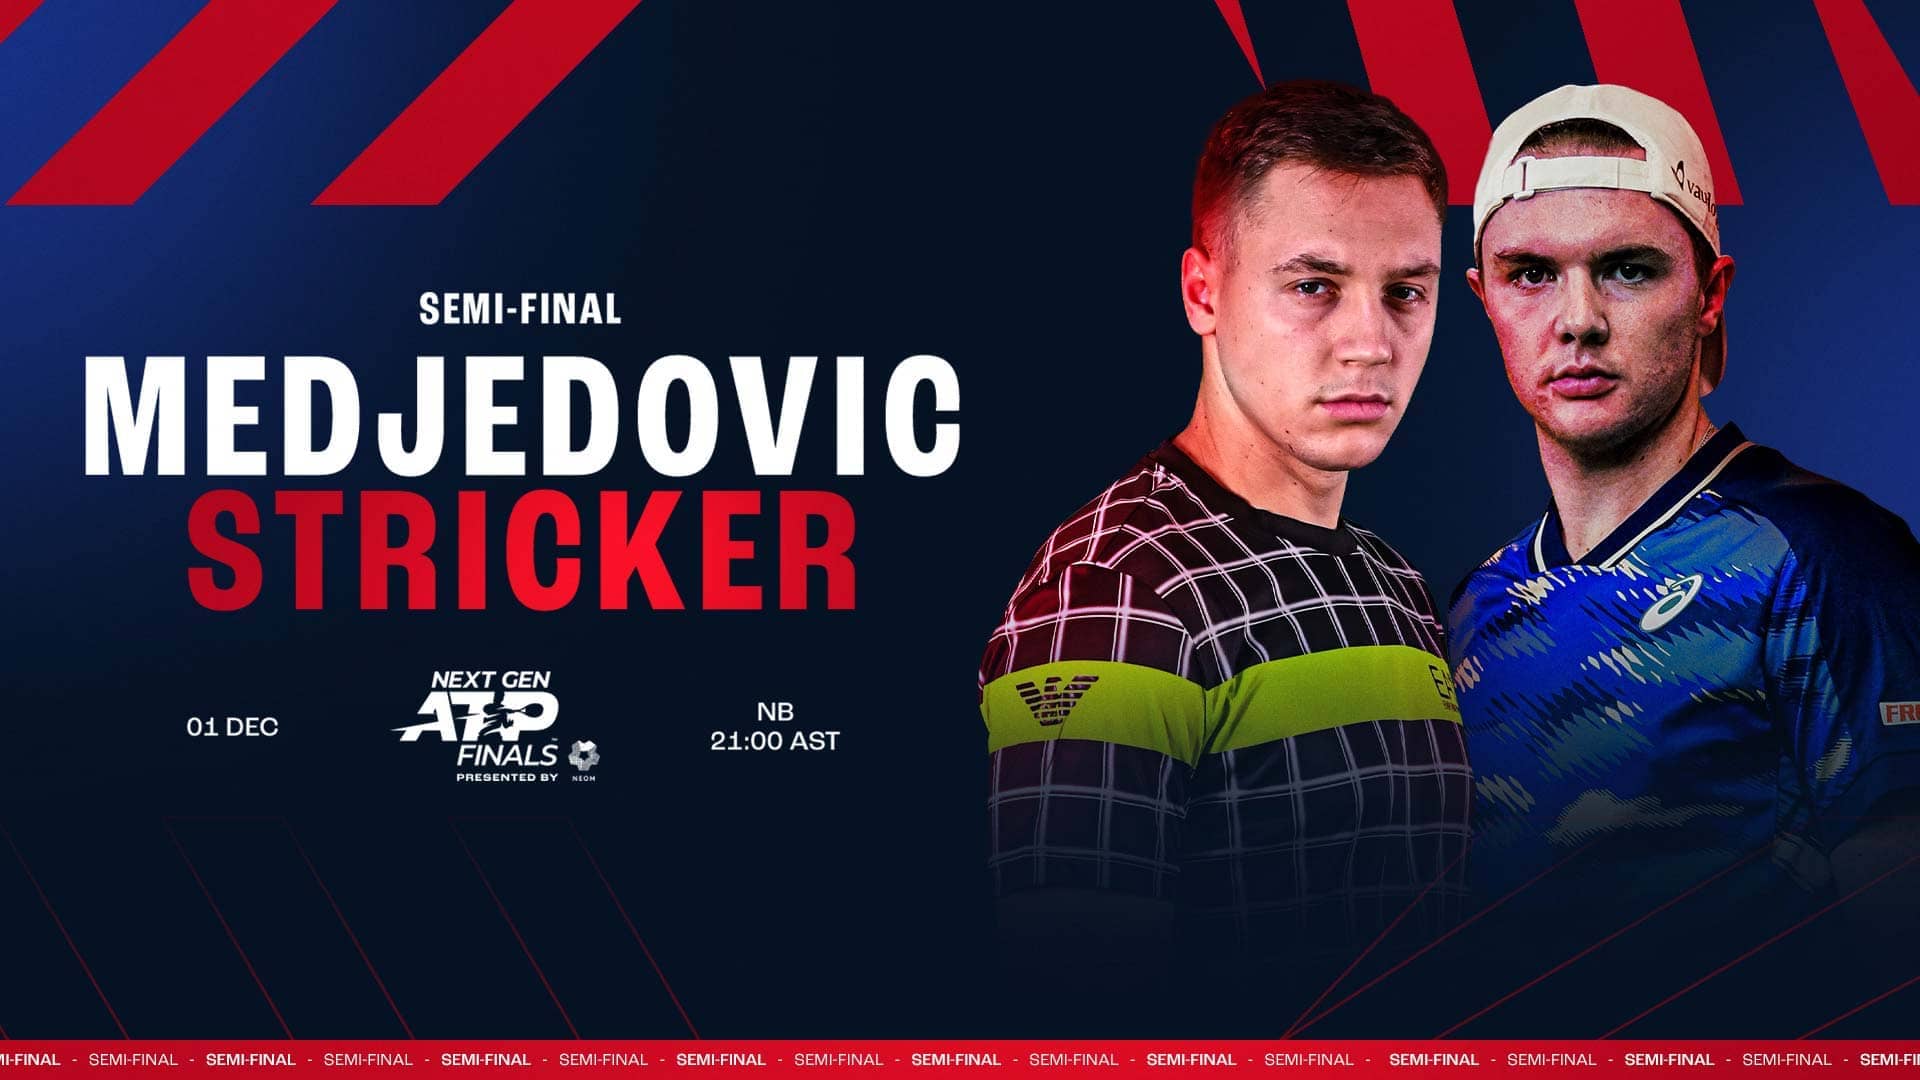 Hamad Medjedovic and Dominic Stricker will contest their first Lexus ATP Head2Head matchup on Friday in the Jeddah semi-finals.